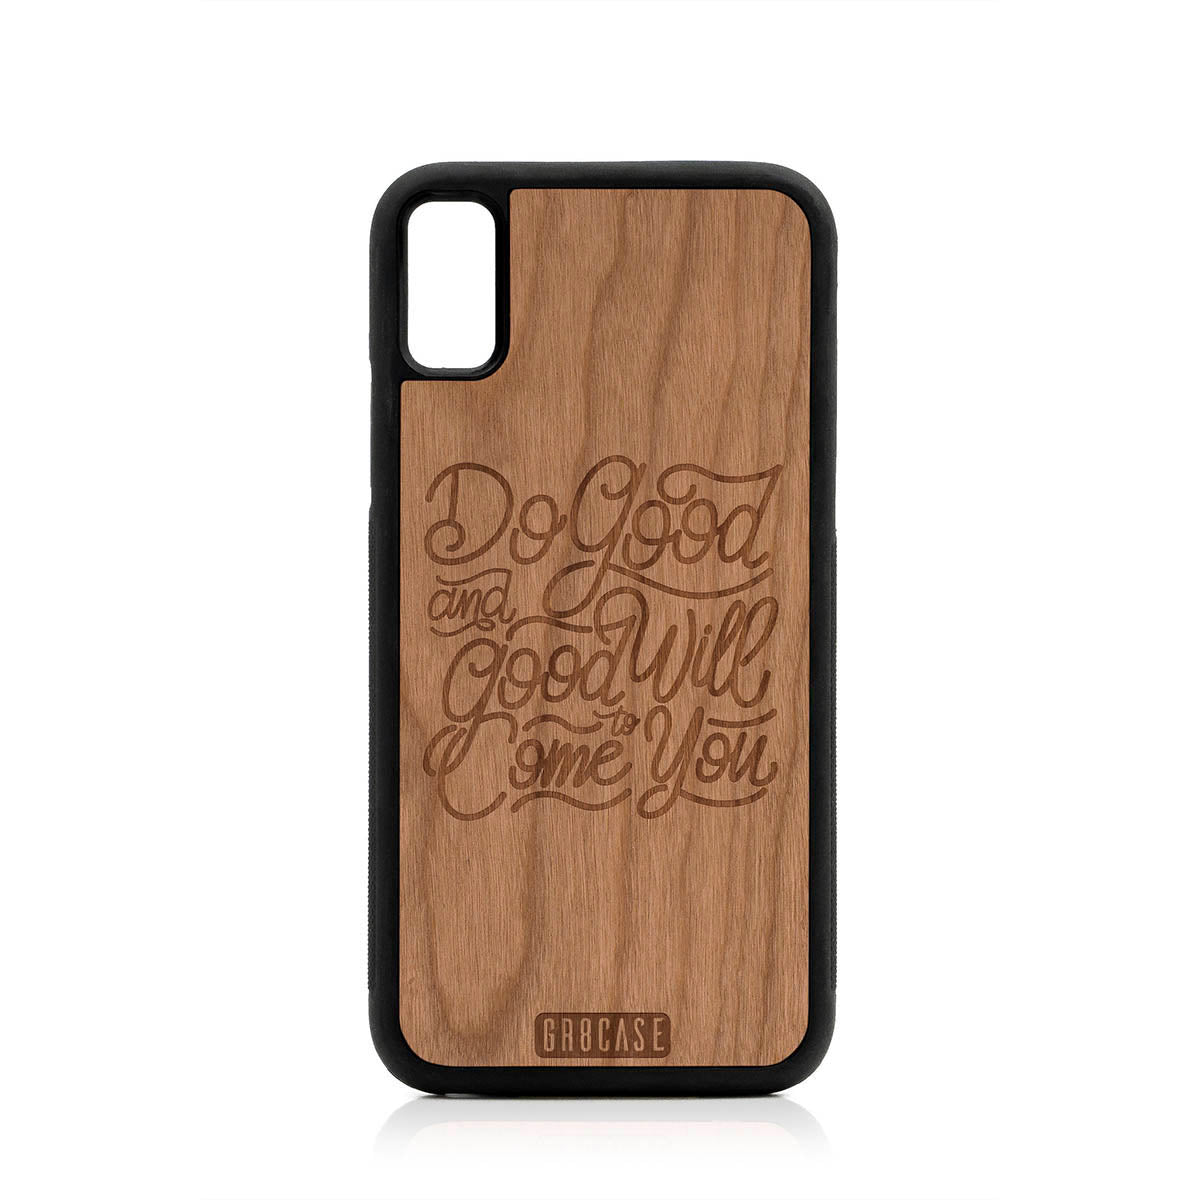 Do Good And Good Will Come To You Design Wood Case For iPhone X/XS by GR8CASE